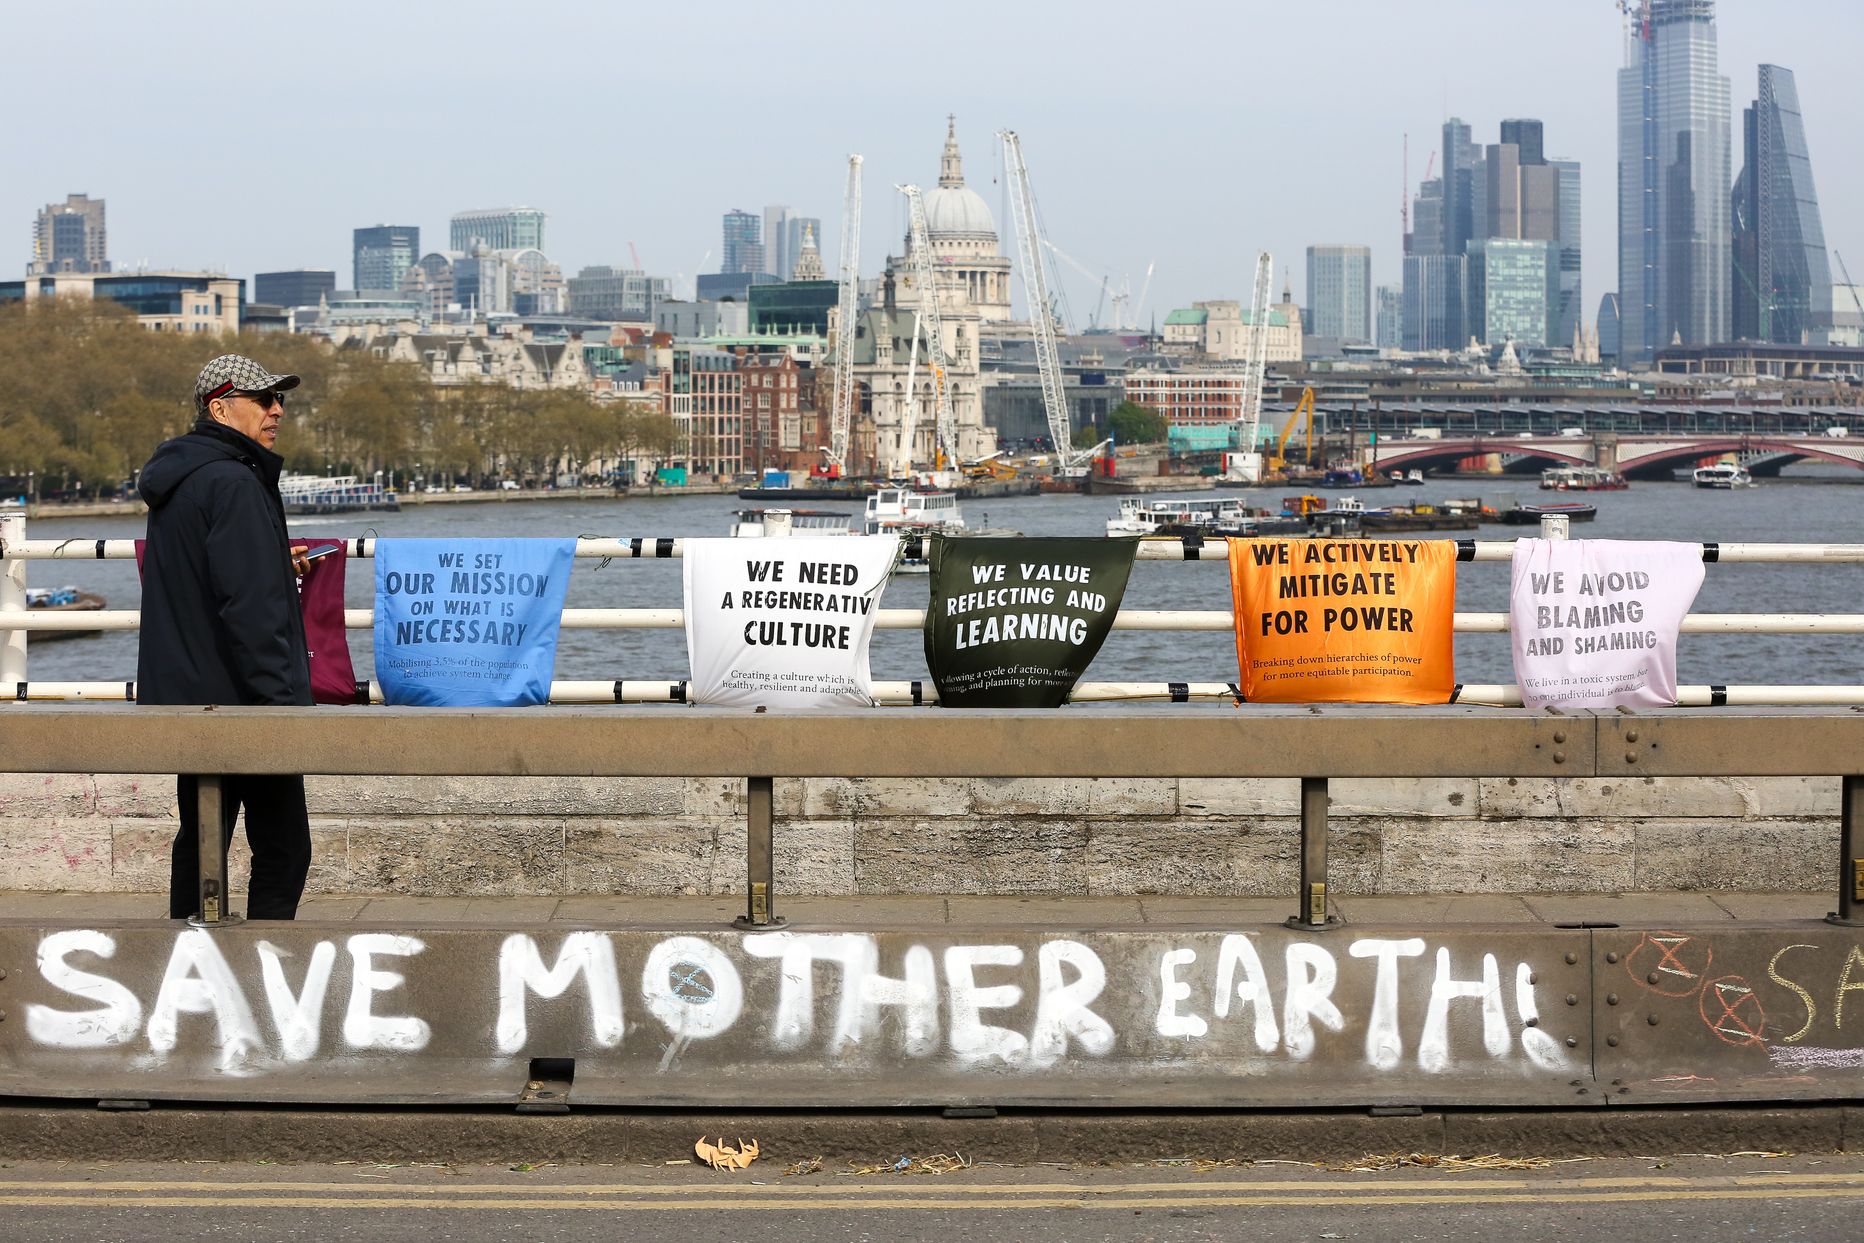 April 18, 2019 - London, UK - A man walks past 'Save Mother Earth' written on the side of the Waterloo Bridge as environmental activists demonstrates on the fourth day of an ongoing climate change protest to demand decisive action from the UK Government on the environmental crisis. (Credit Image: © Dinendra Haria/London News Pictures via ZUMA Wire)